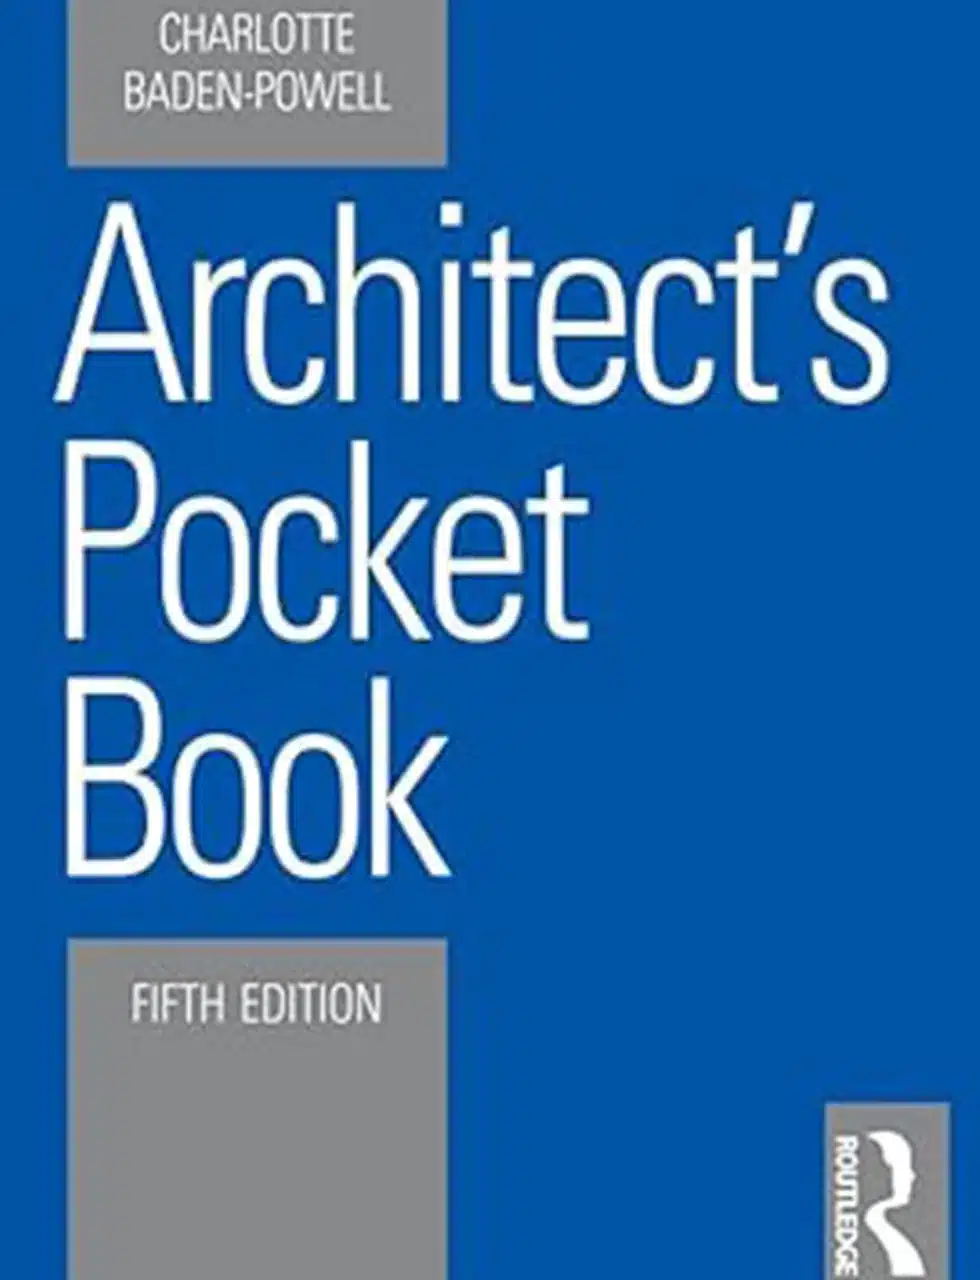 architects pocket book katharine pooley interior design guides learning expert